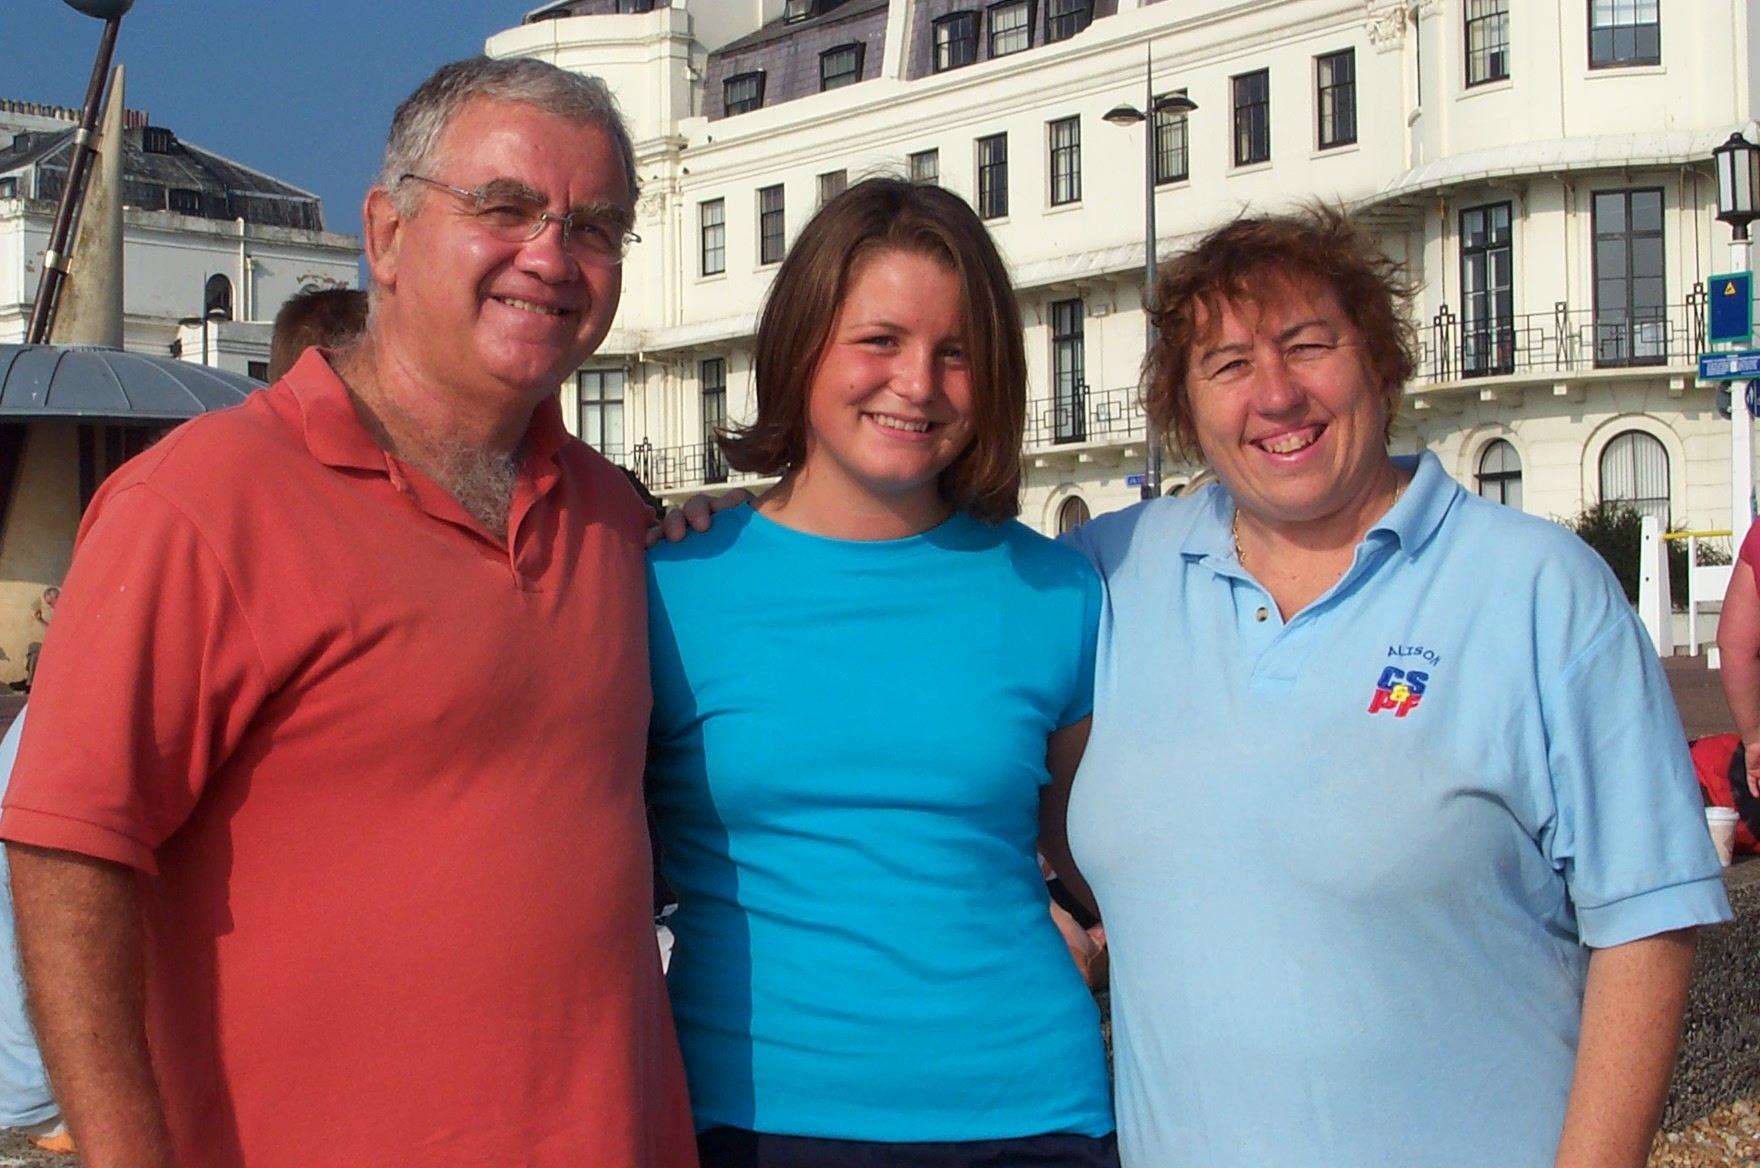 Megan Forbes was congratulated by King of the Channel Kevin Murphy and Queen of the Channel Alison Streeter following her Channel swim in 2007